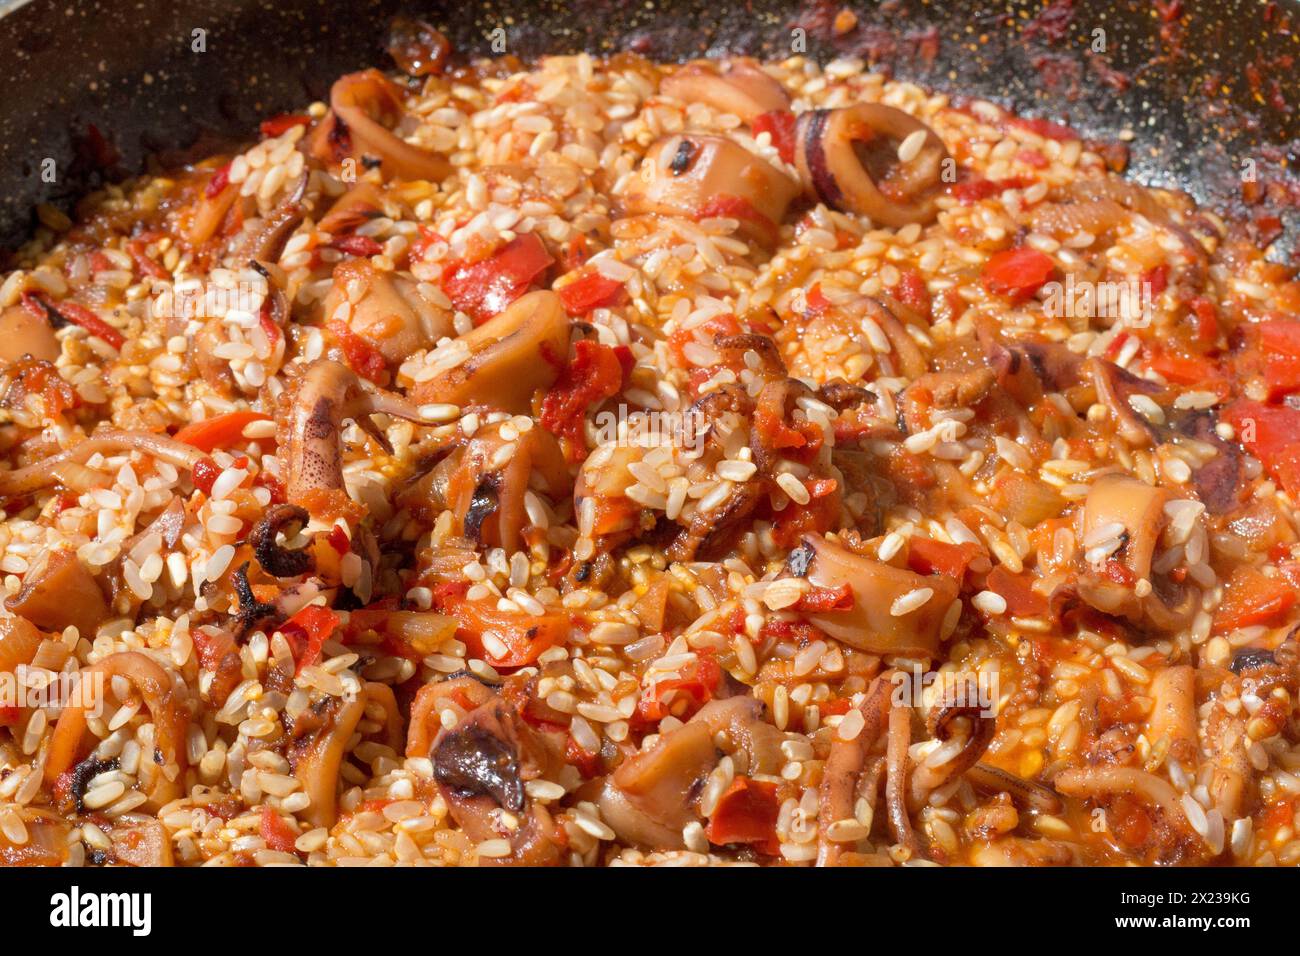 Witness the pivotal moment as rice joins the aromatic sofrito, enhancing the essence of traditional Spanish paella Stock Photo